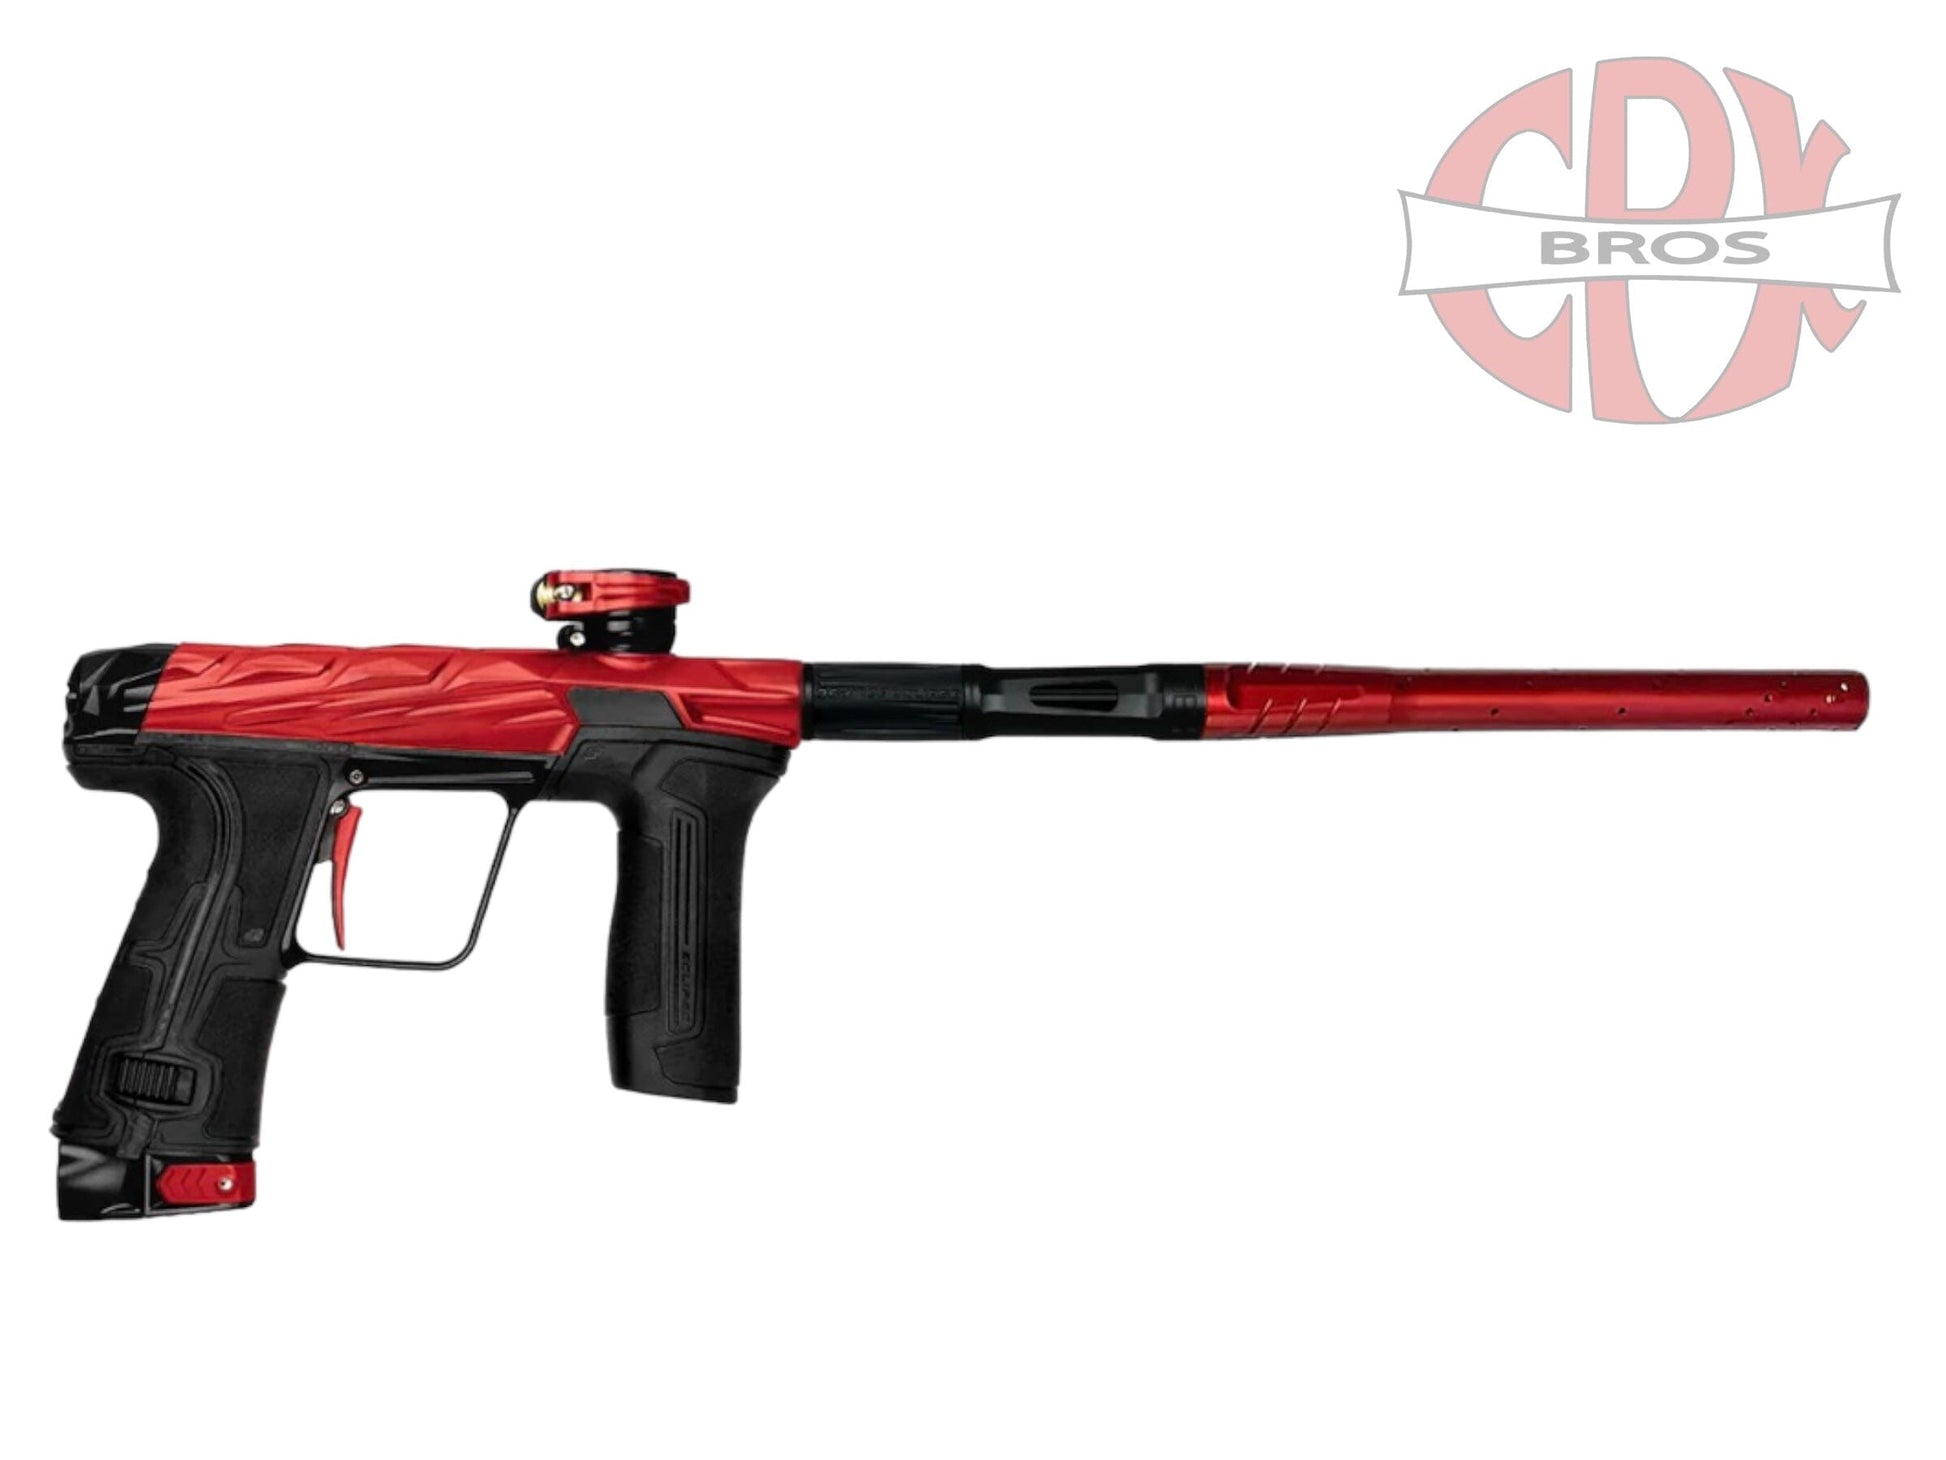 Used NEW PLANET ECLIPSE CS3 - INFAMOUS EDITION RED/BLACK Paintball Gun from CPXBrosPaintball Buy/Sell/Trade Paintball Markers, New Paintball Guns, Paintball Hoppers, Paintball Masks, and Hormesis Headbands